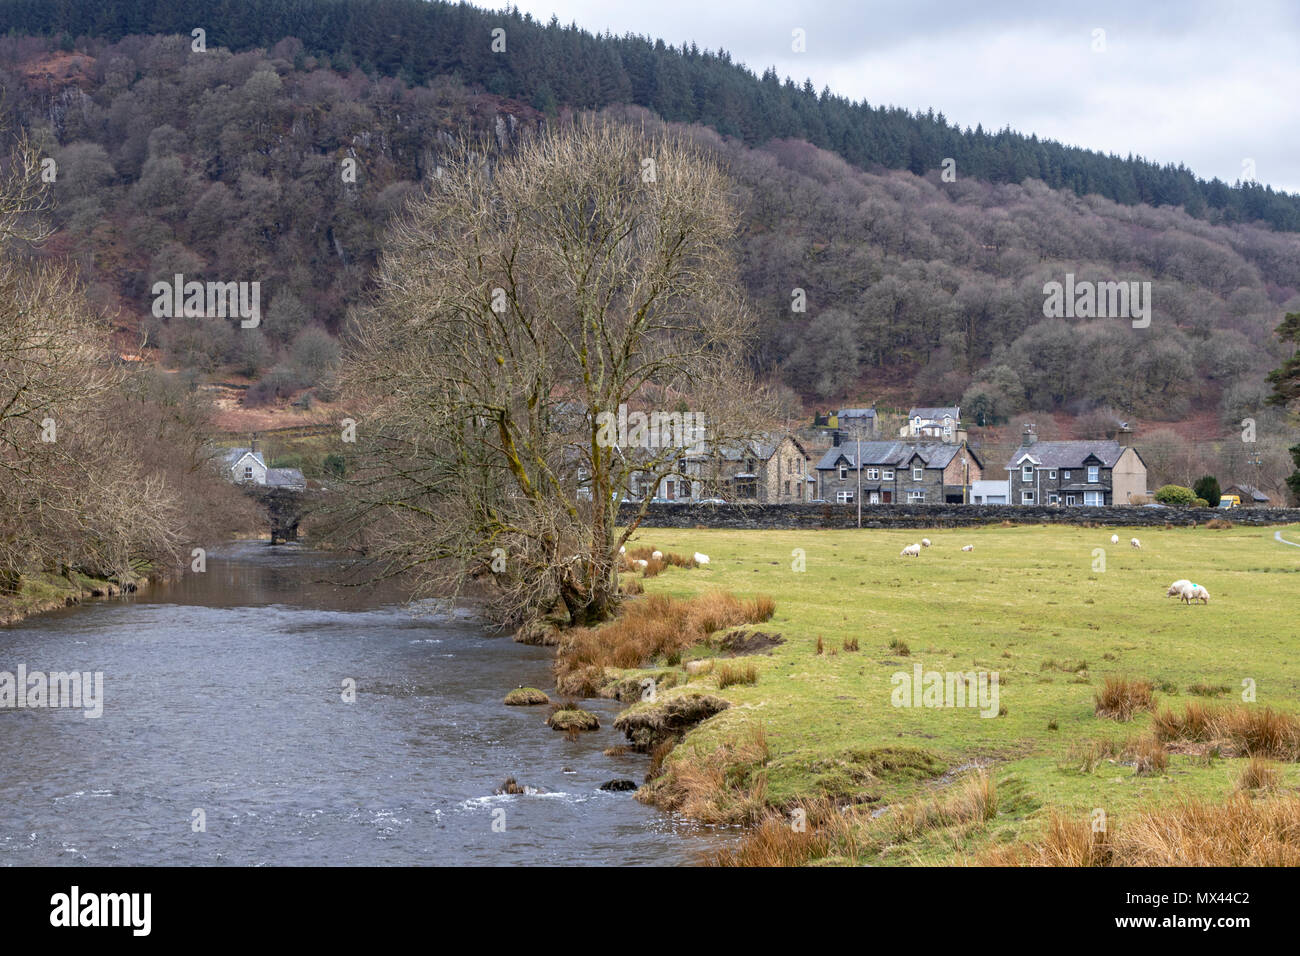 Pintoresque village of Dolwyddelan in the Snowdonia National Park, Wales Stock Photo